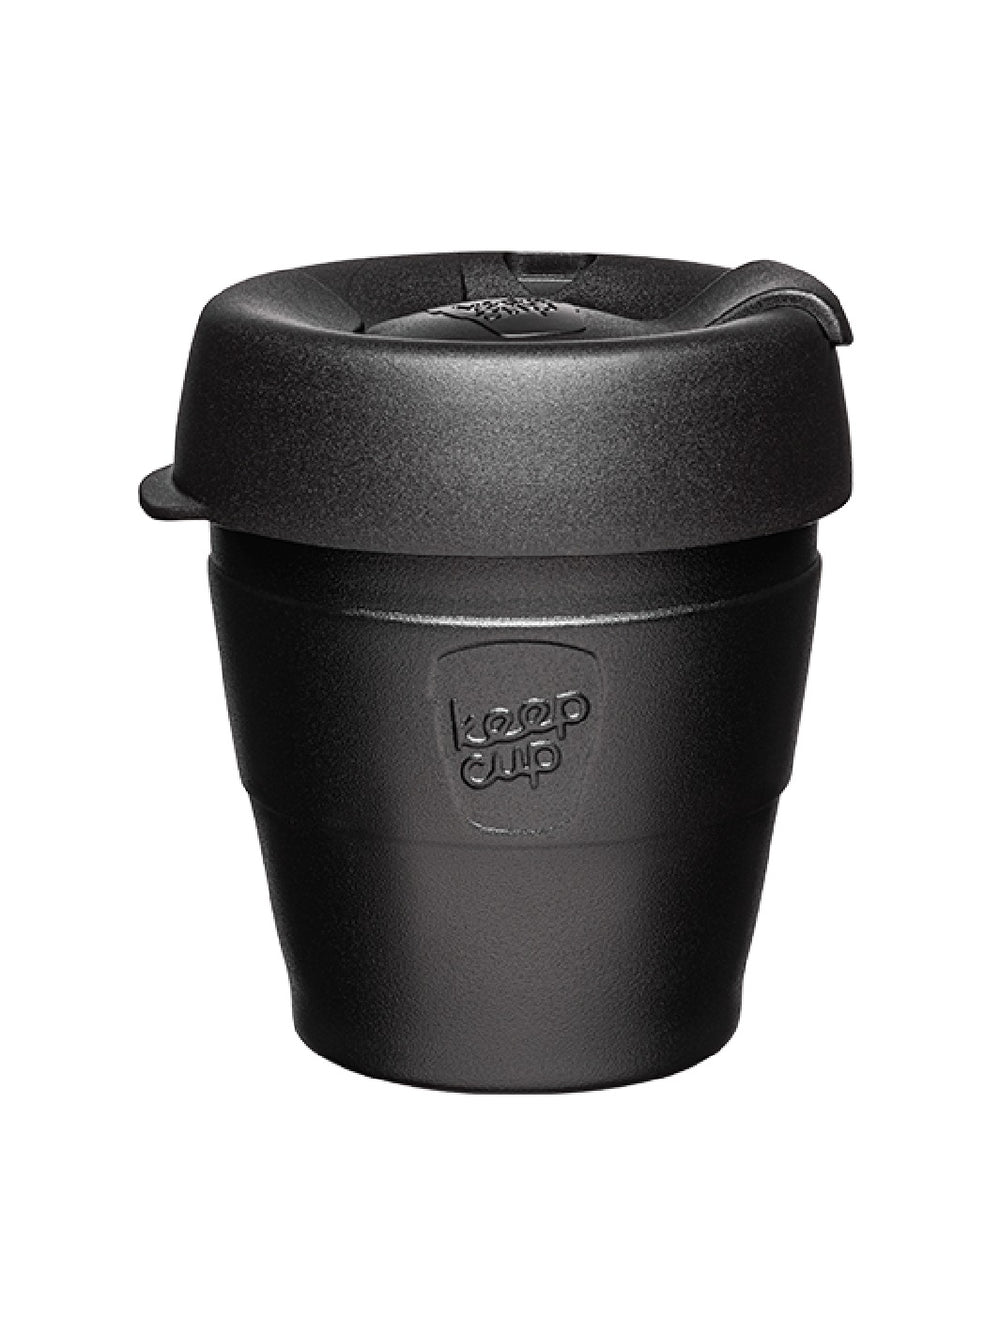 Parts of a KeepCup (not at scale): A-Lid for plastic cup, B-Lid